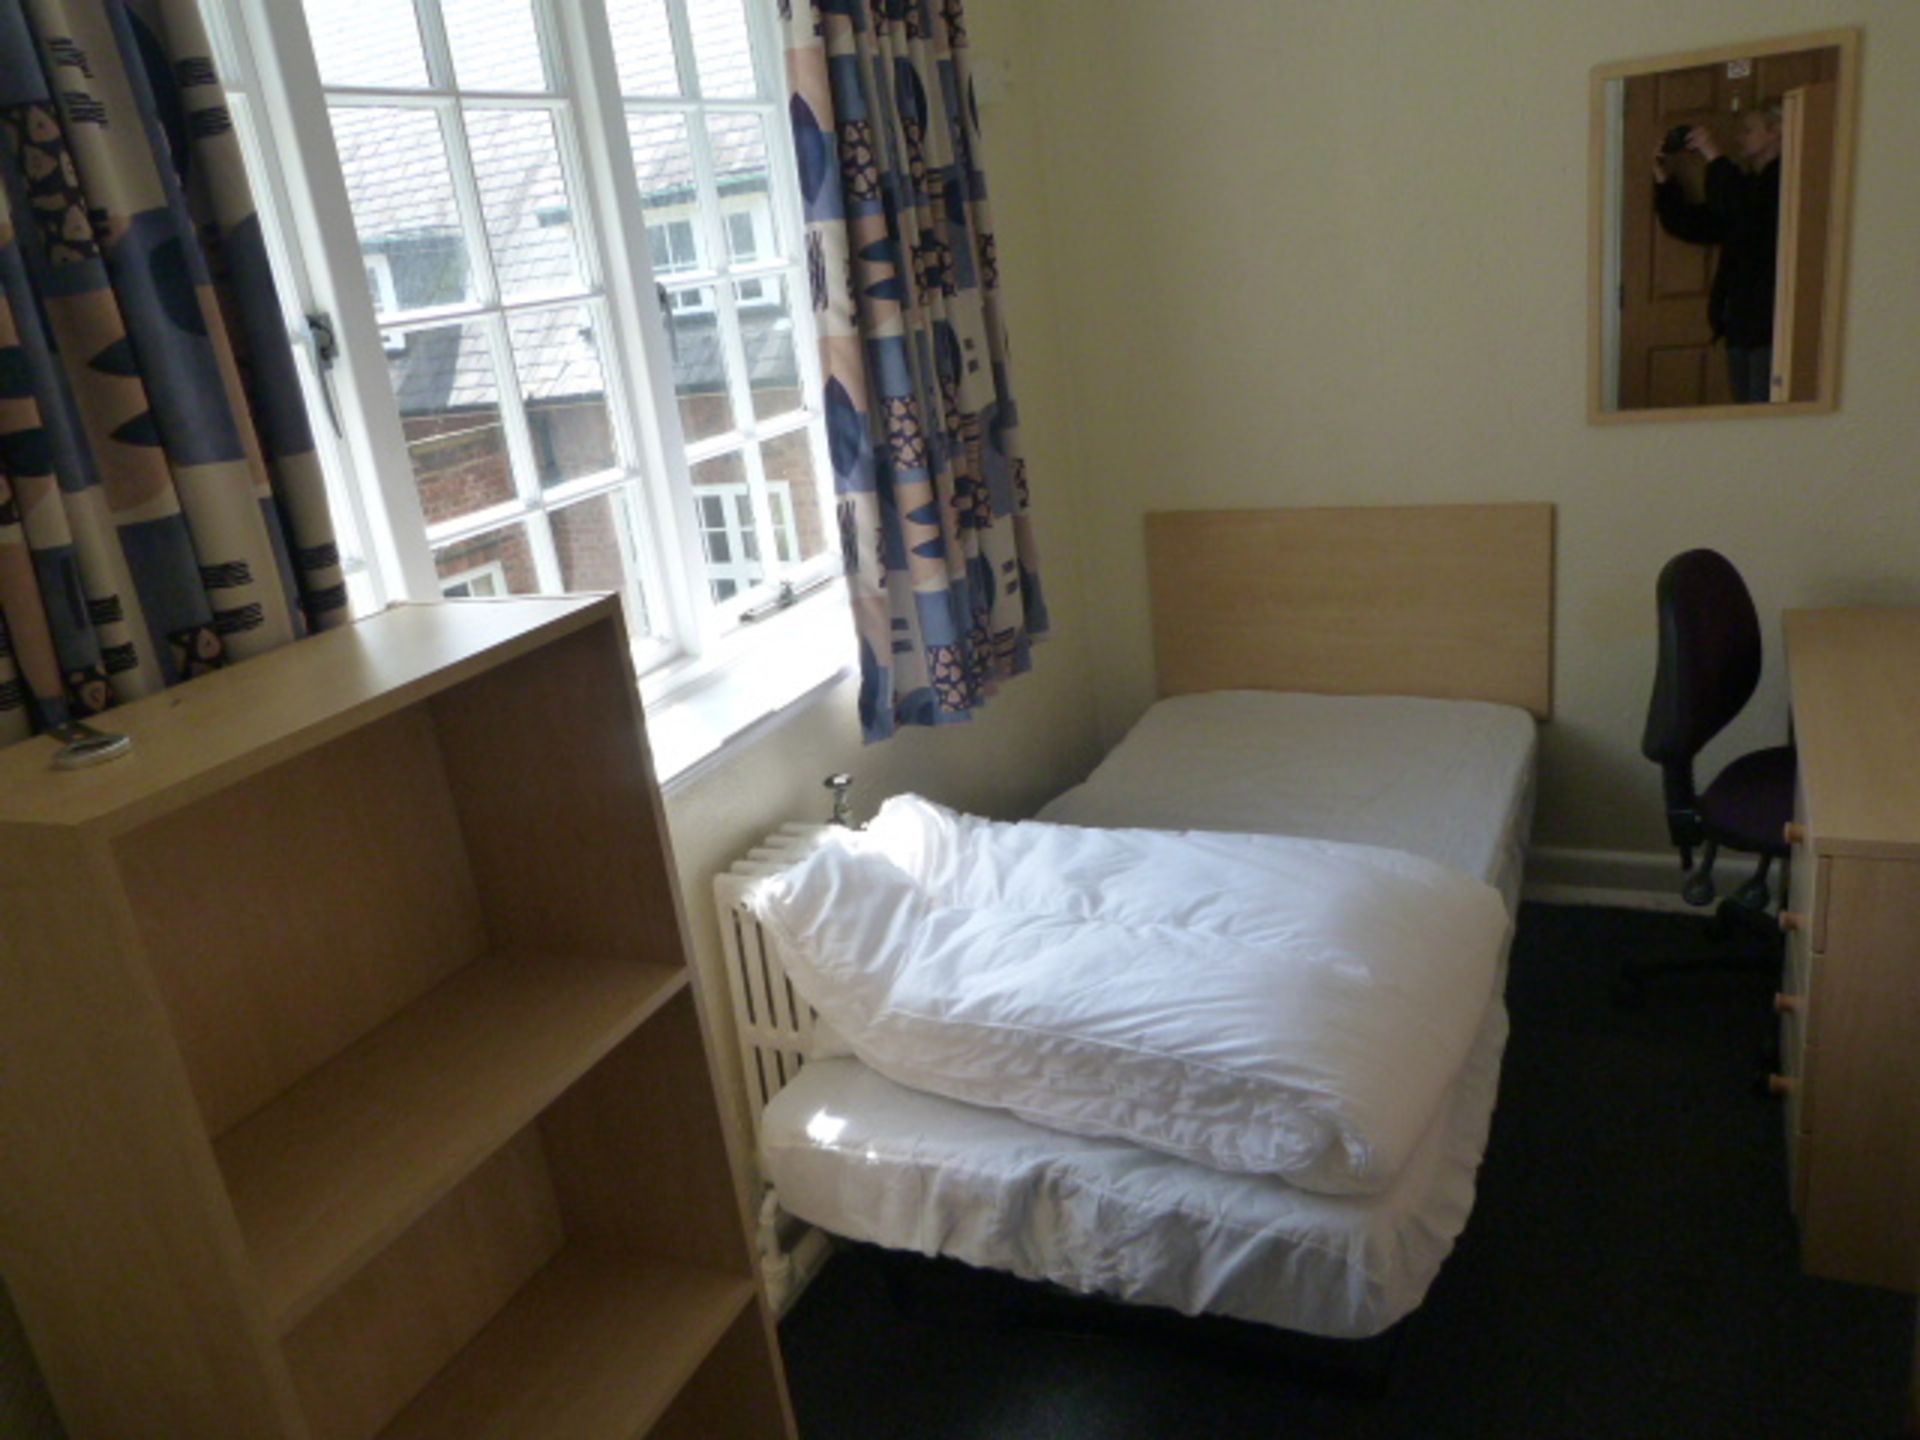 *Contents of Room 88A; Single Bed with Mattress, B